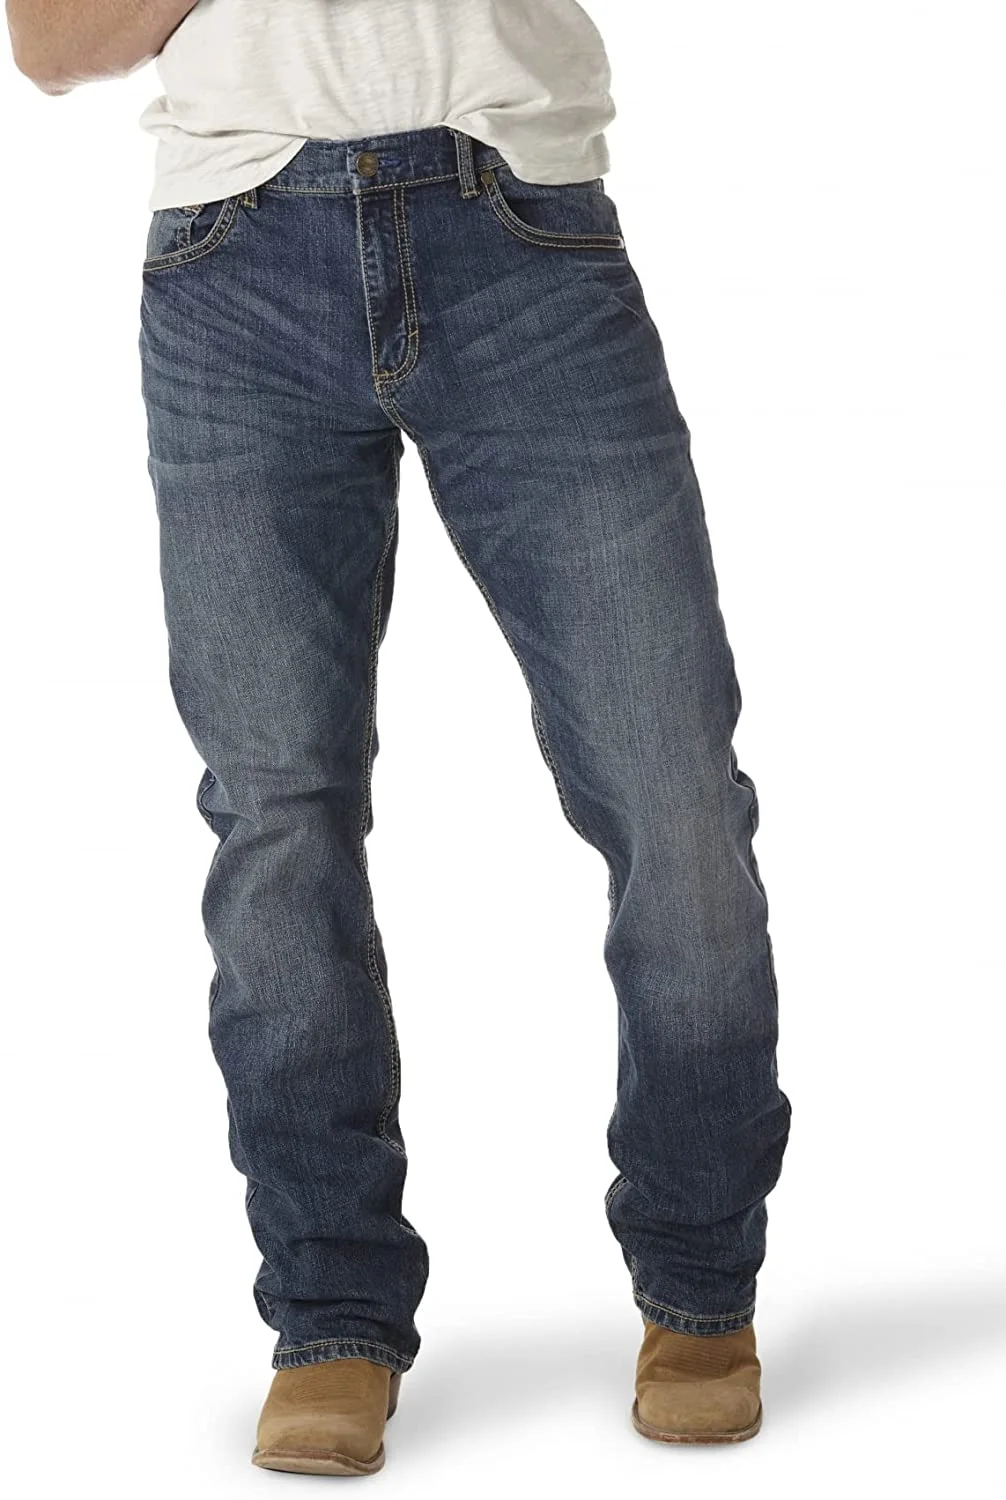 Wholesale Mens Slim Fit Stretch Jean Manufacturer In Bangladesh Factory And Supplier